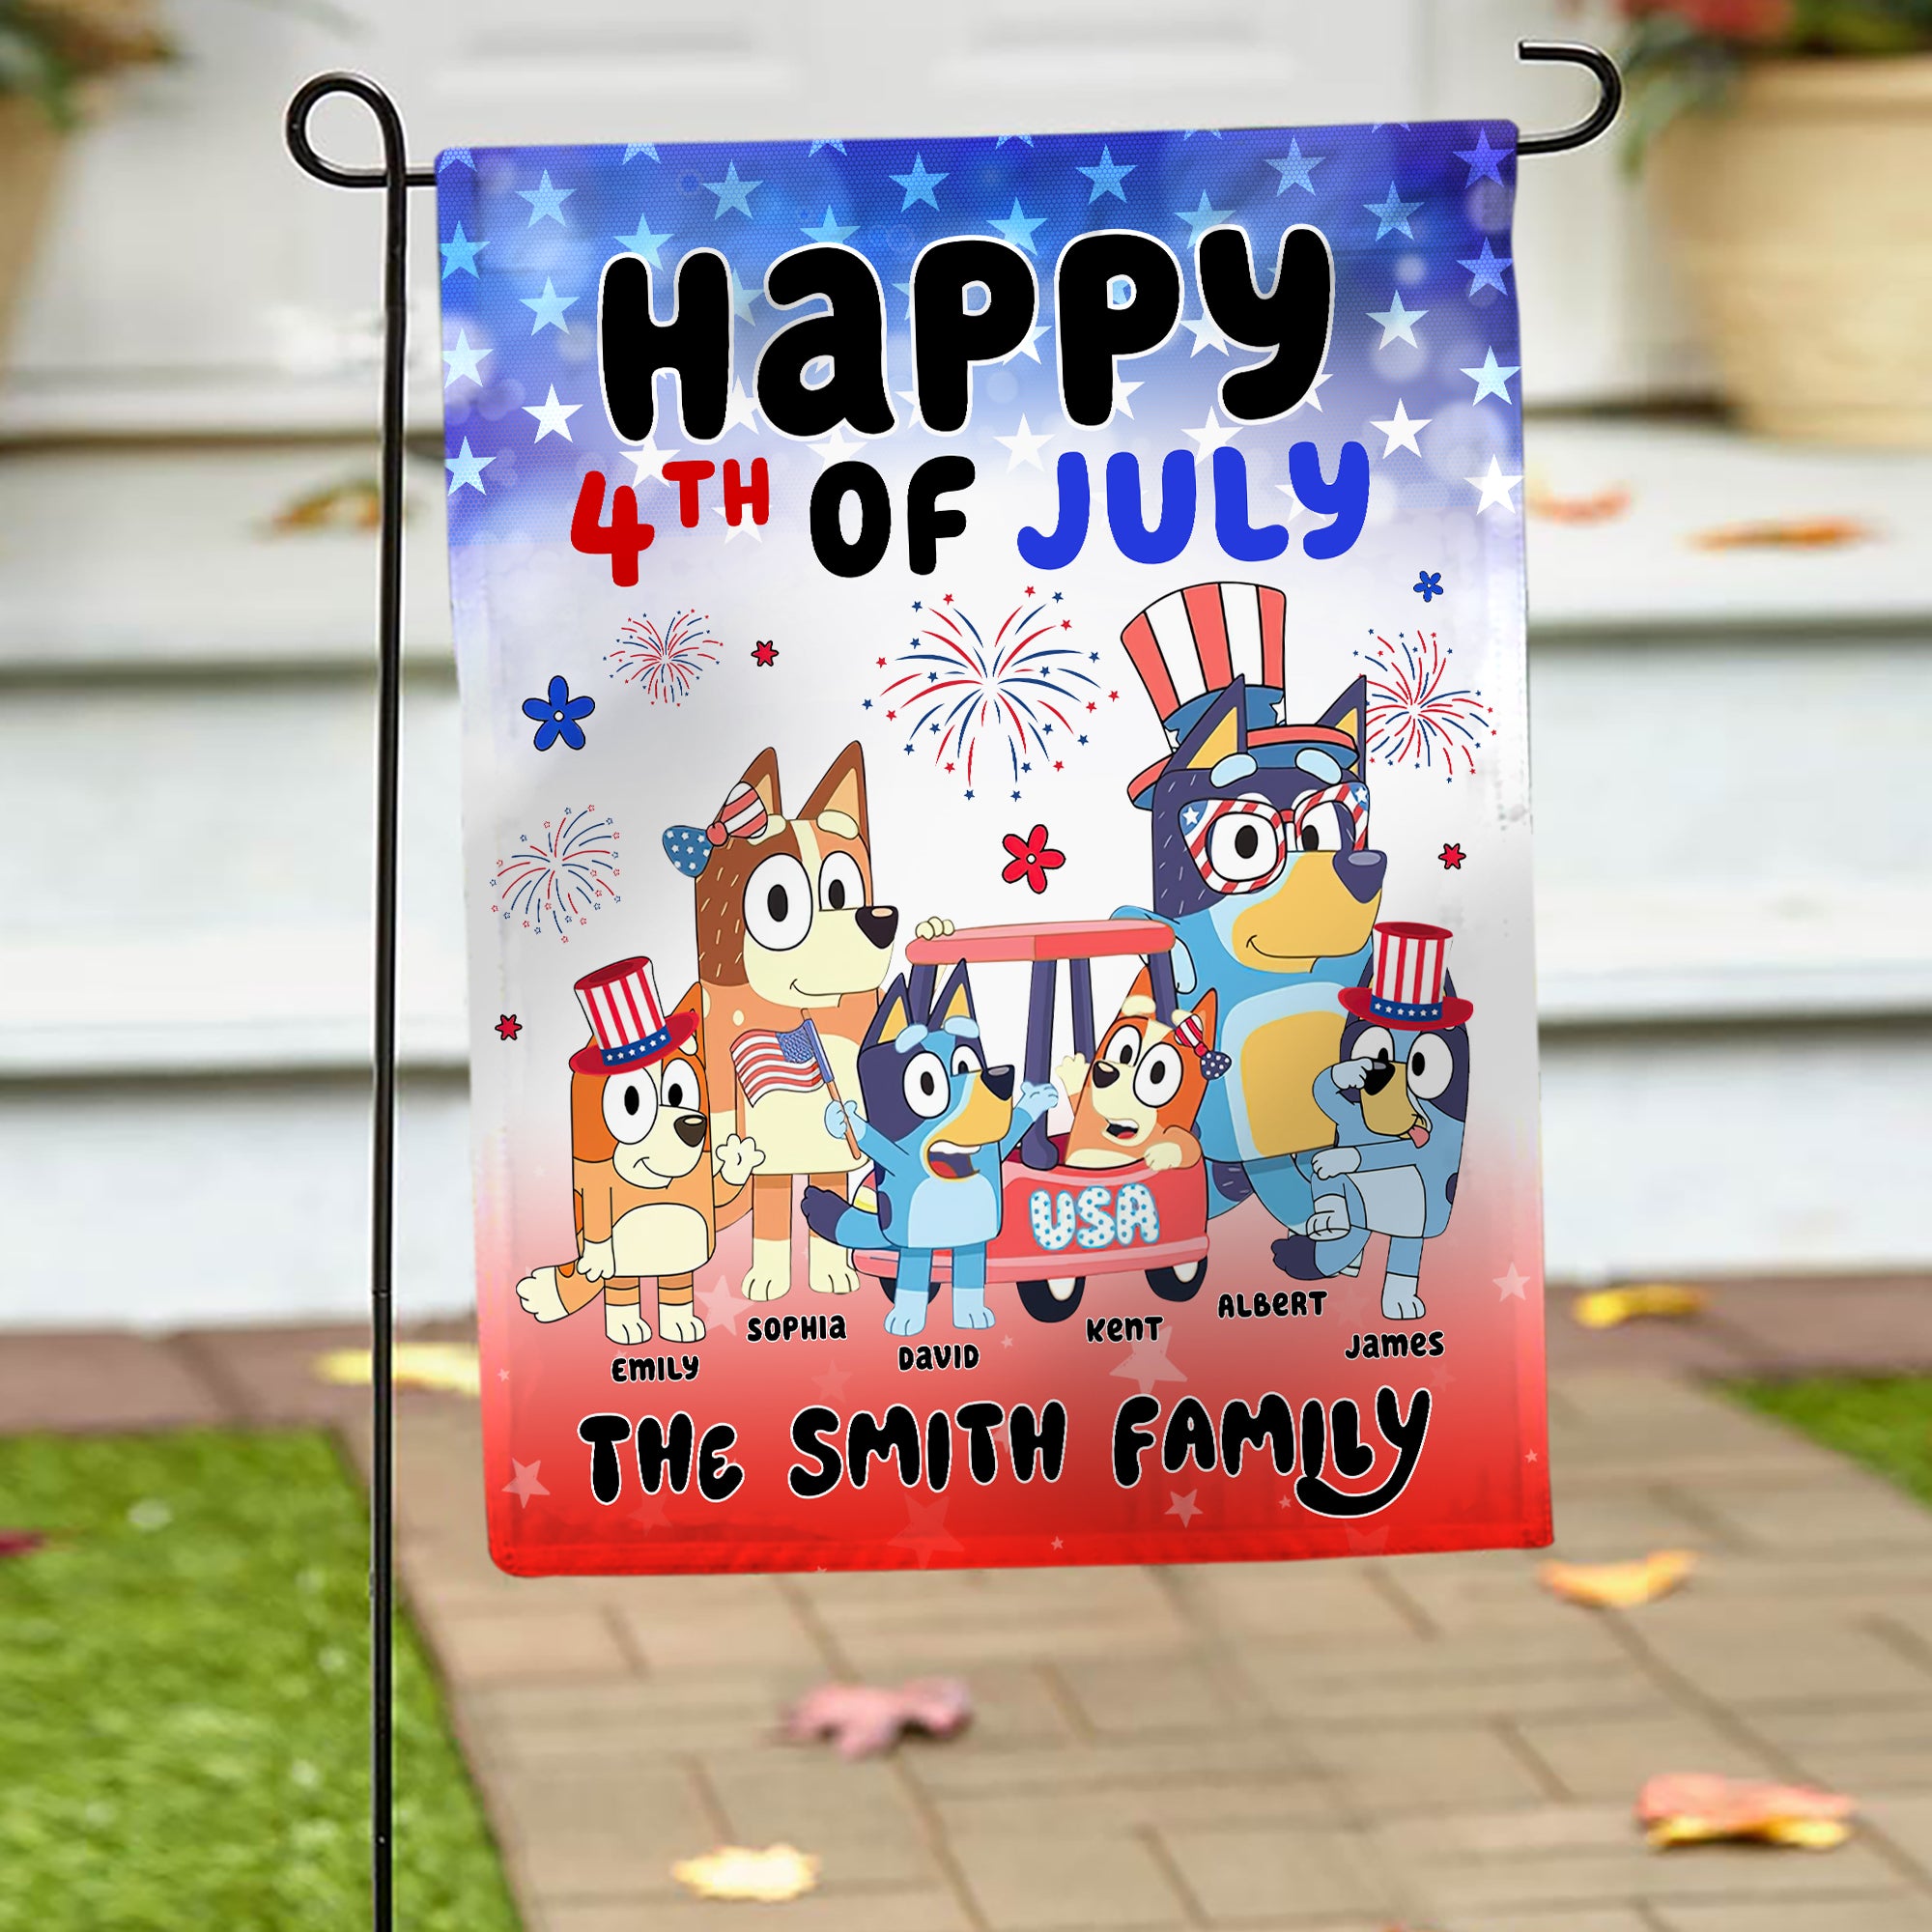 Personalized Gifts For Family Garden Flag 02toqn030624 4th of July-Homacus